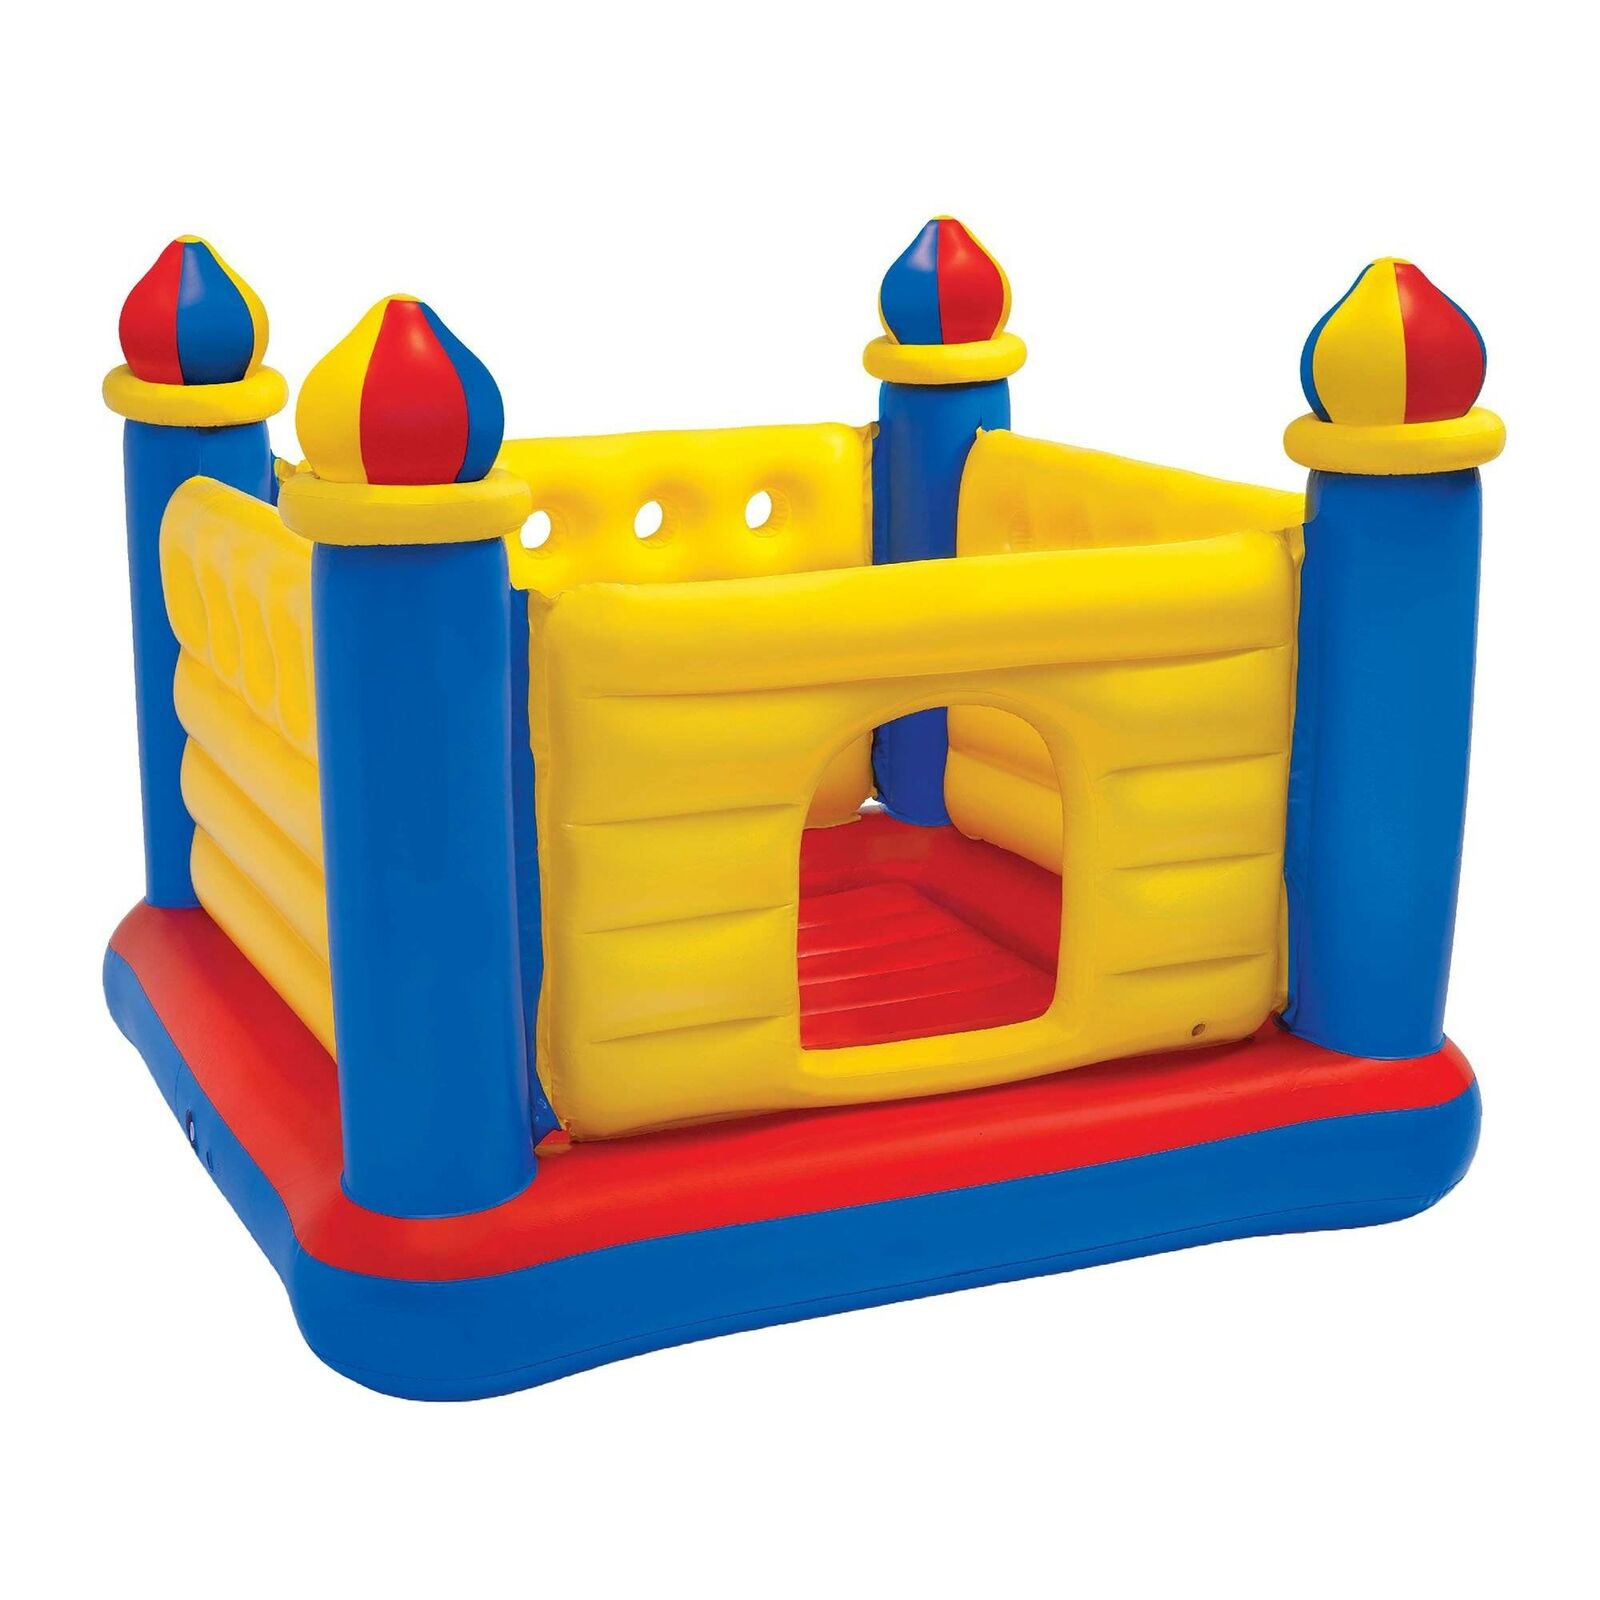 INTEX Inflatable Jump-O-Lene Ball Pit Castle Bouncer Ages 3-6 (Open Box)